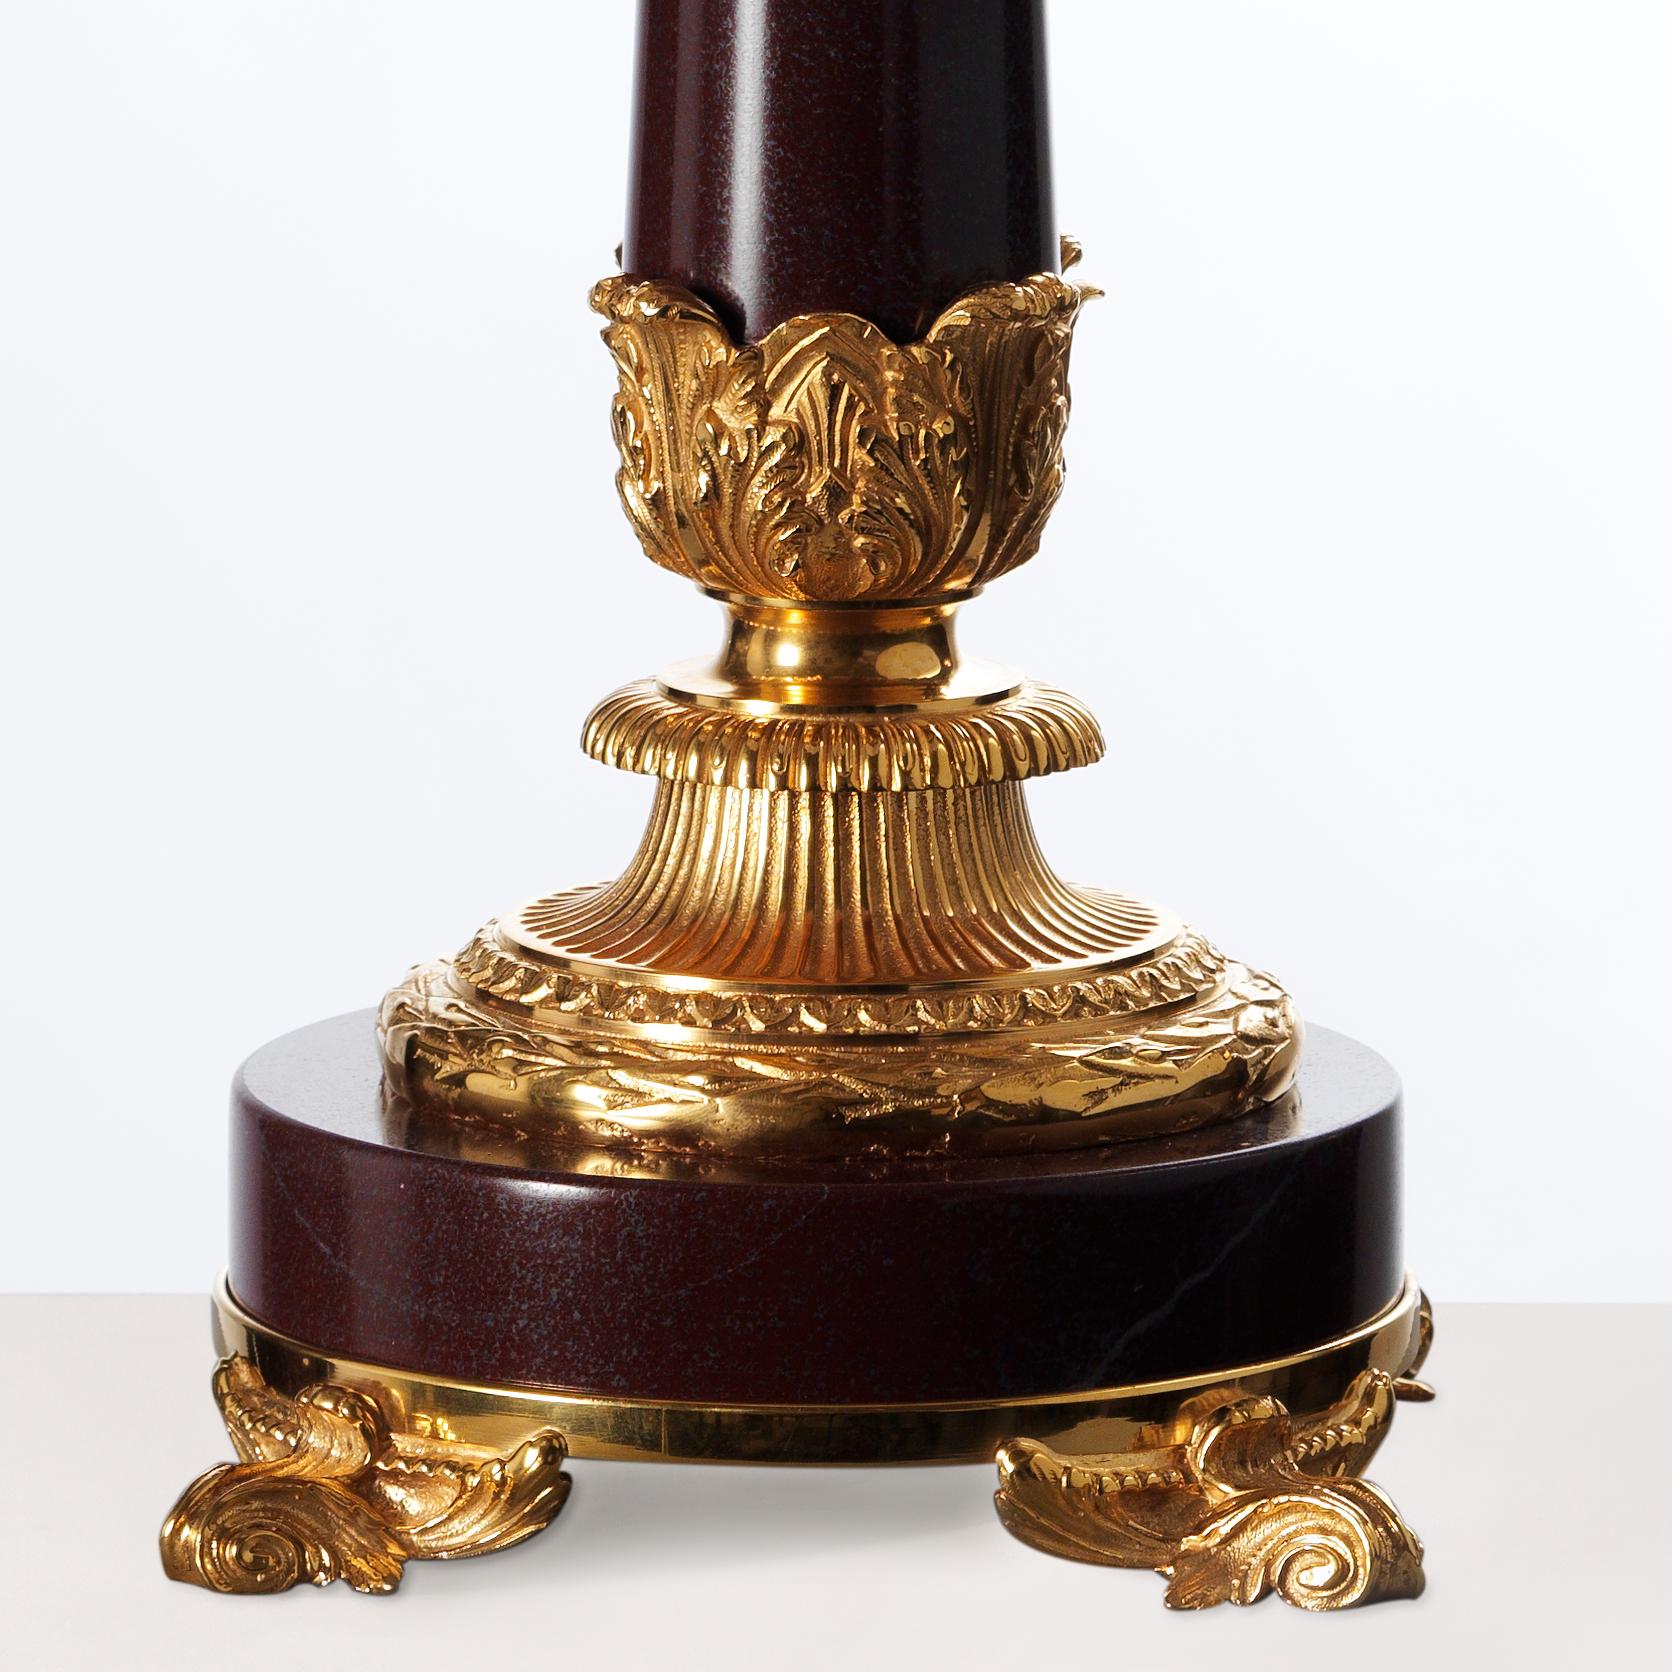 This elegant Louis XVI Style Gilt Bronze and Red Marble Lamp By Gherardo Degli Albizzi features high-quality gilt bronze decoration such as the fully chiseled Corinthian style capital or the base with a blossom motif.
This piece offers a large